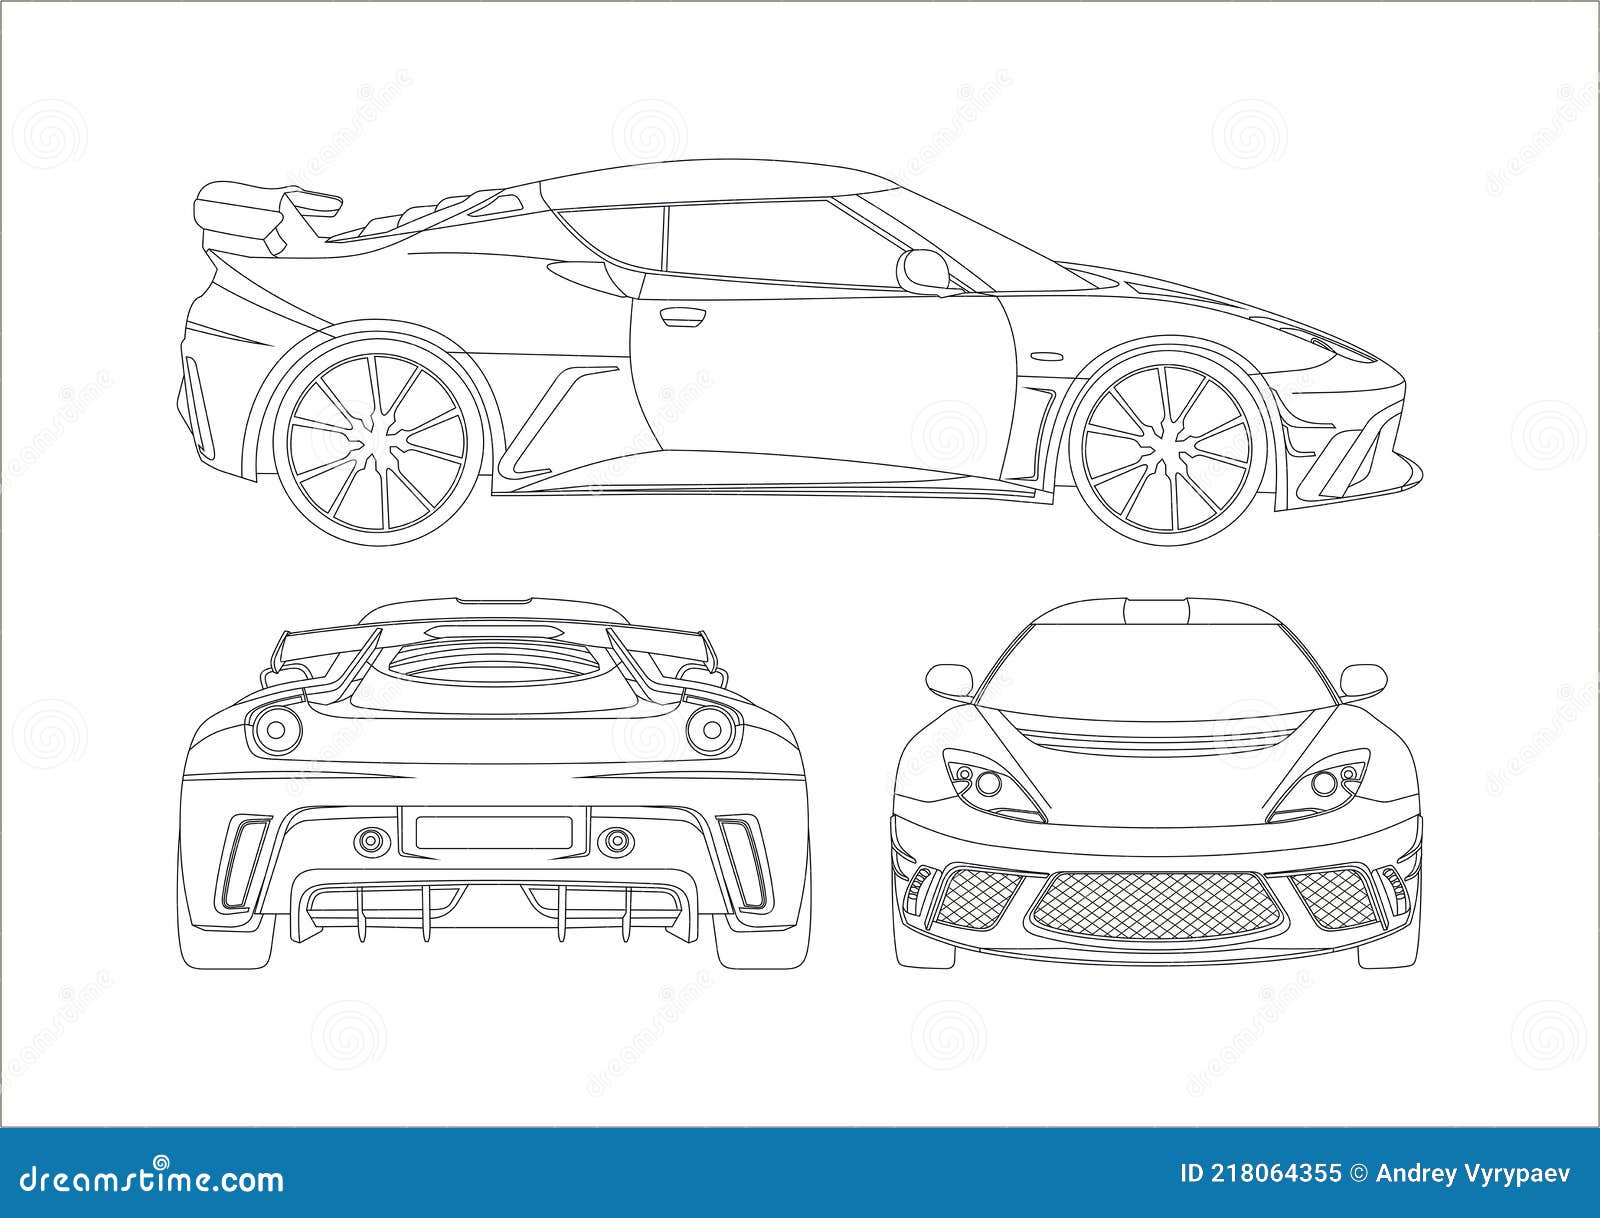 Contour Drawing of a Sports Car Stock Vector - Illustration of front ...